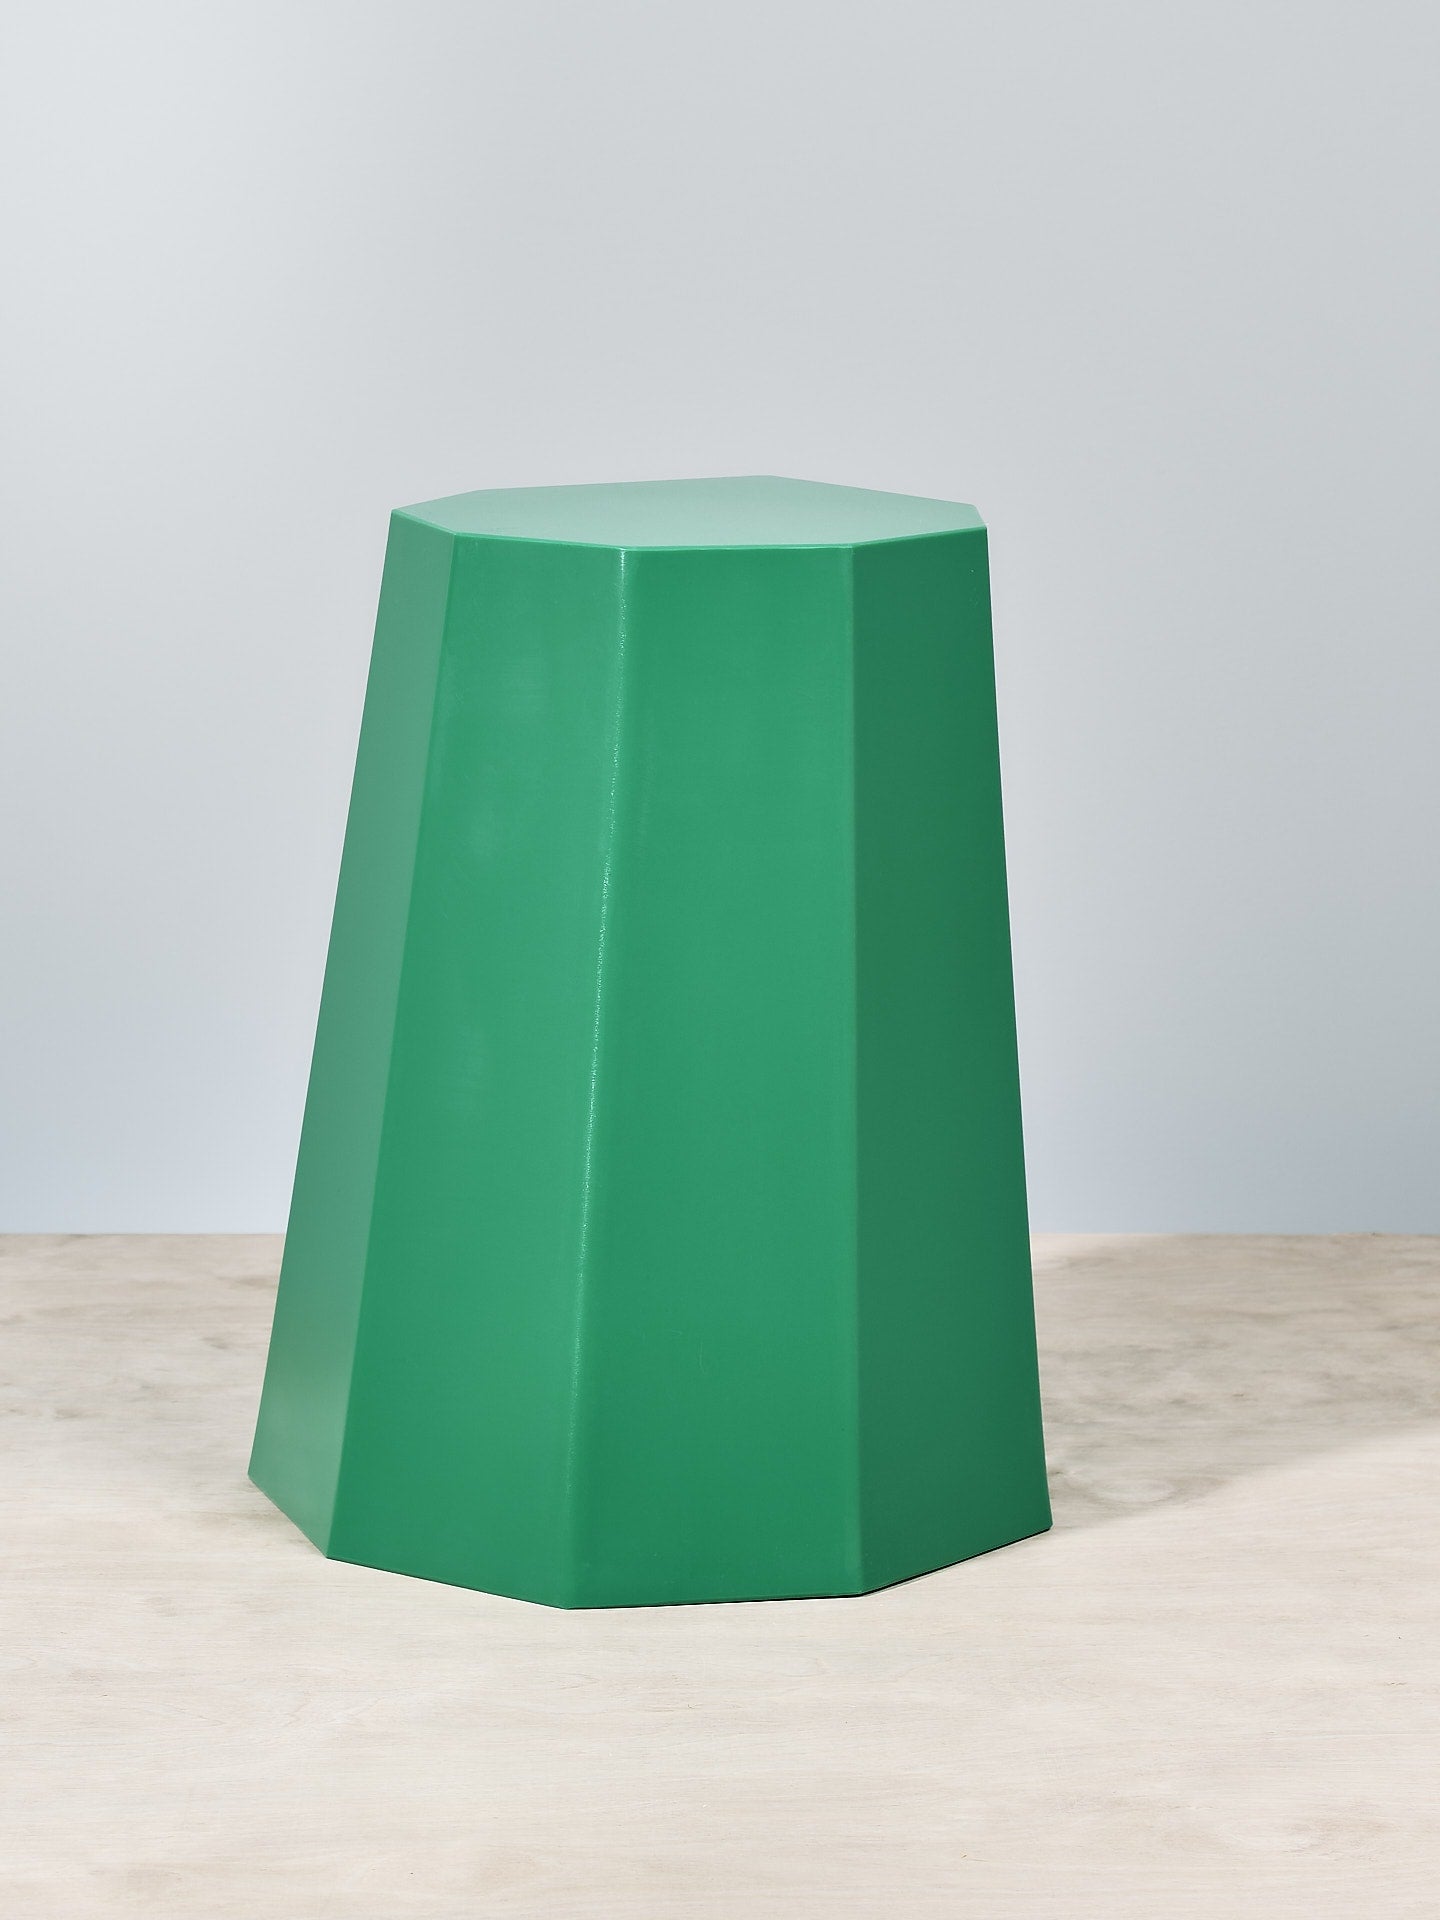 A Martino Gamper Arnold Circus Stool - Bright Green on top of a wooden floor.